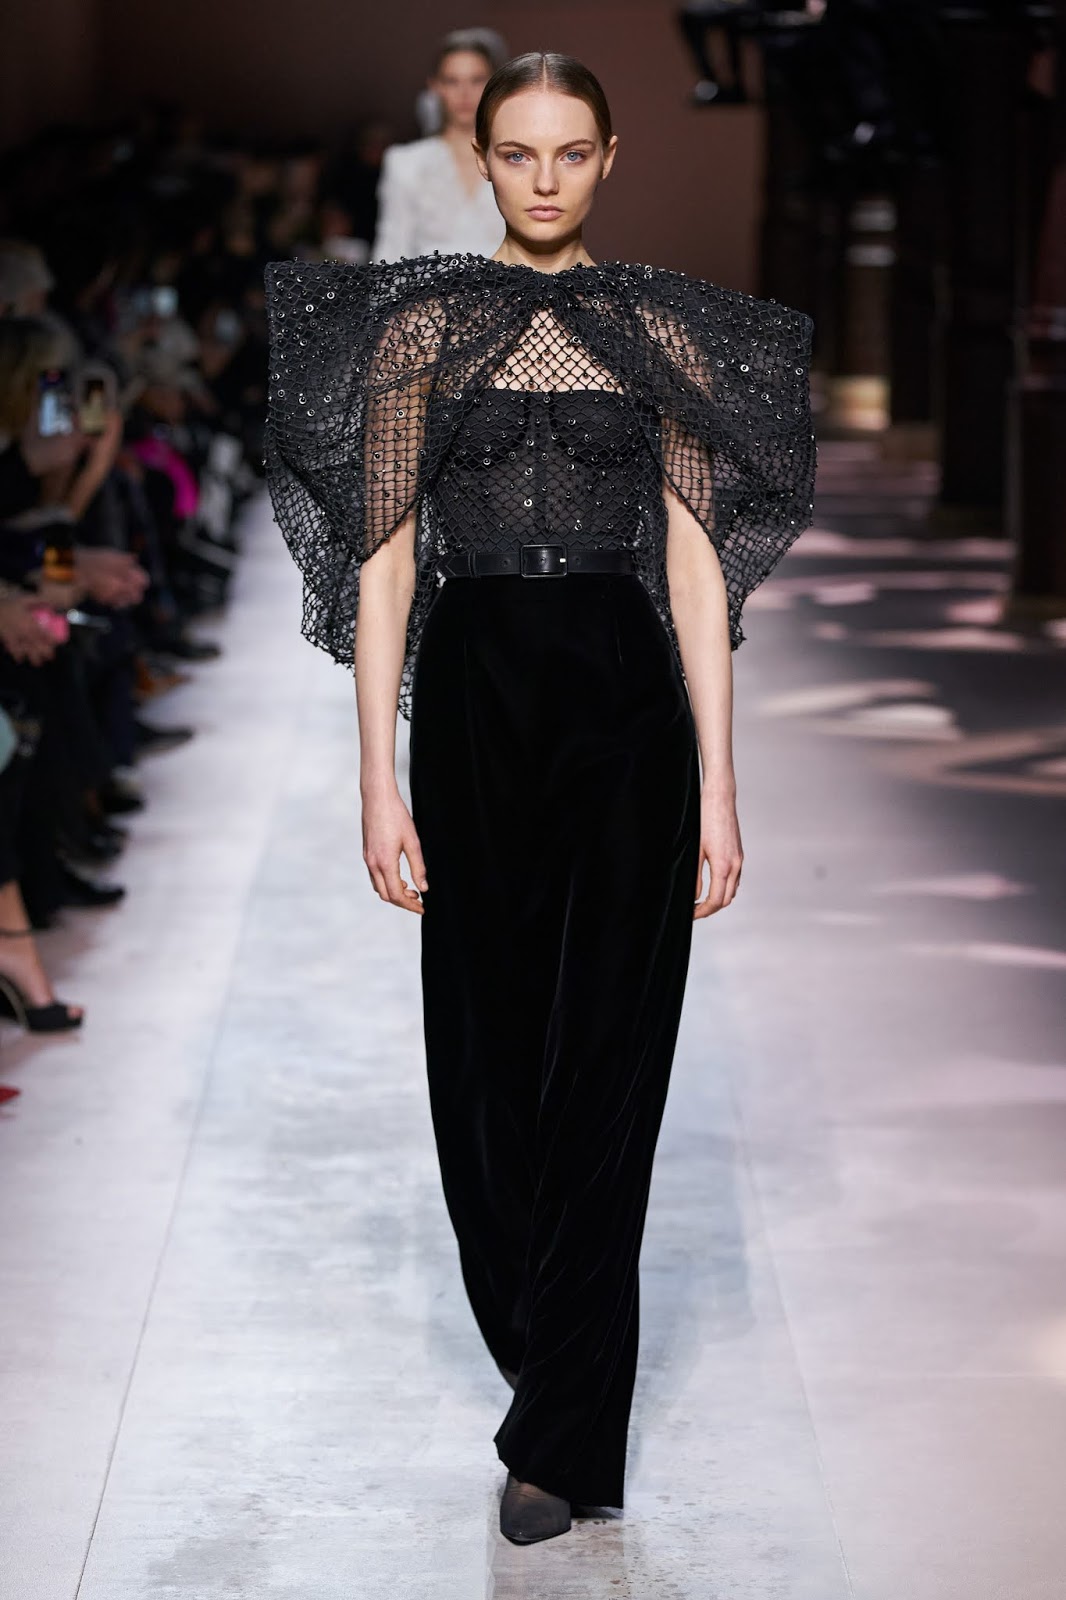 Haute Couture Glamour: GIVENCHY February 15, 2020 | ZsaZsa Bellagio ...